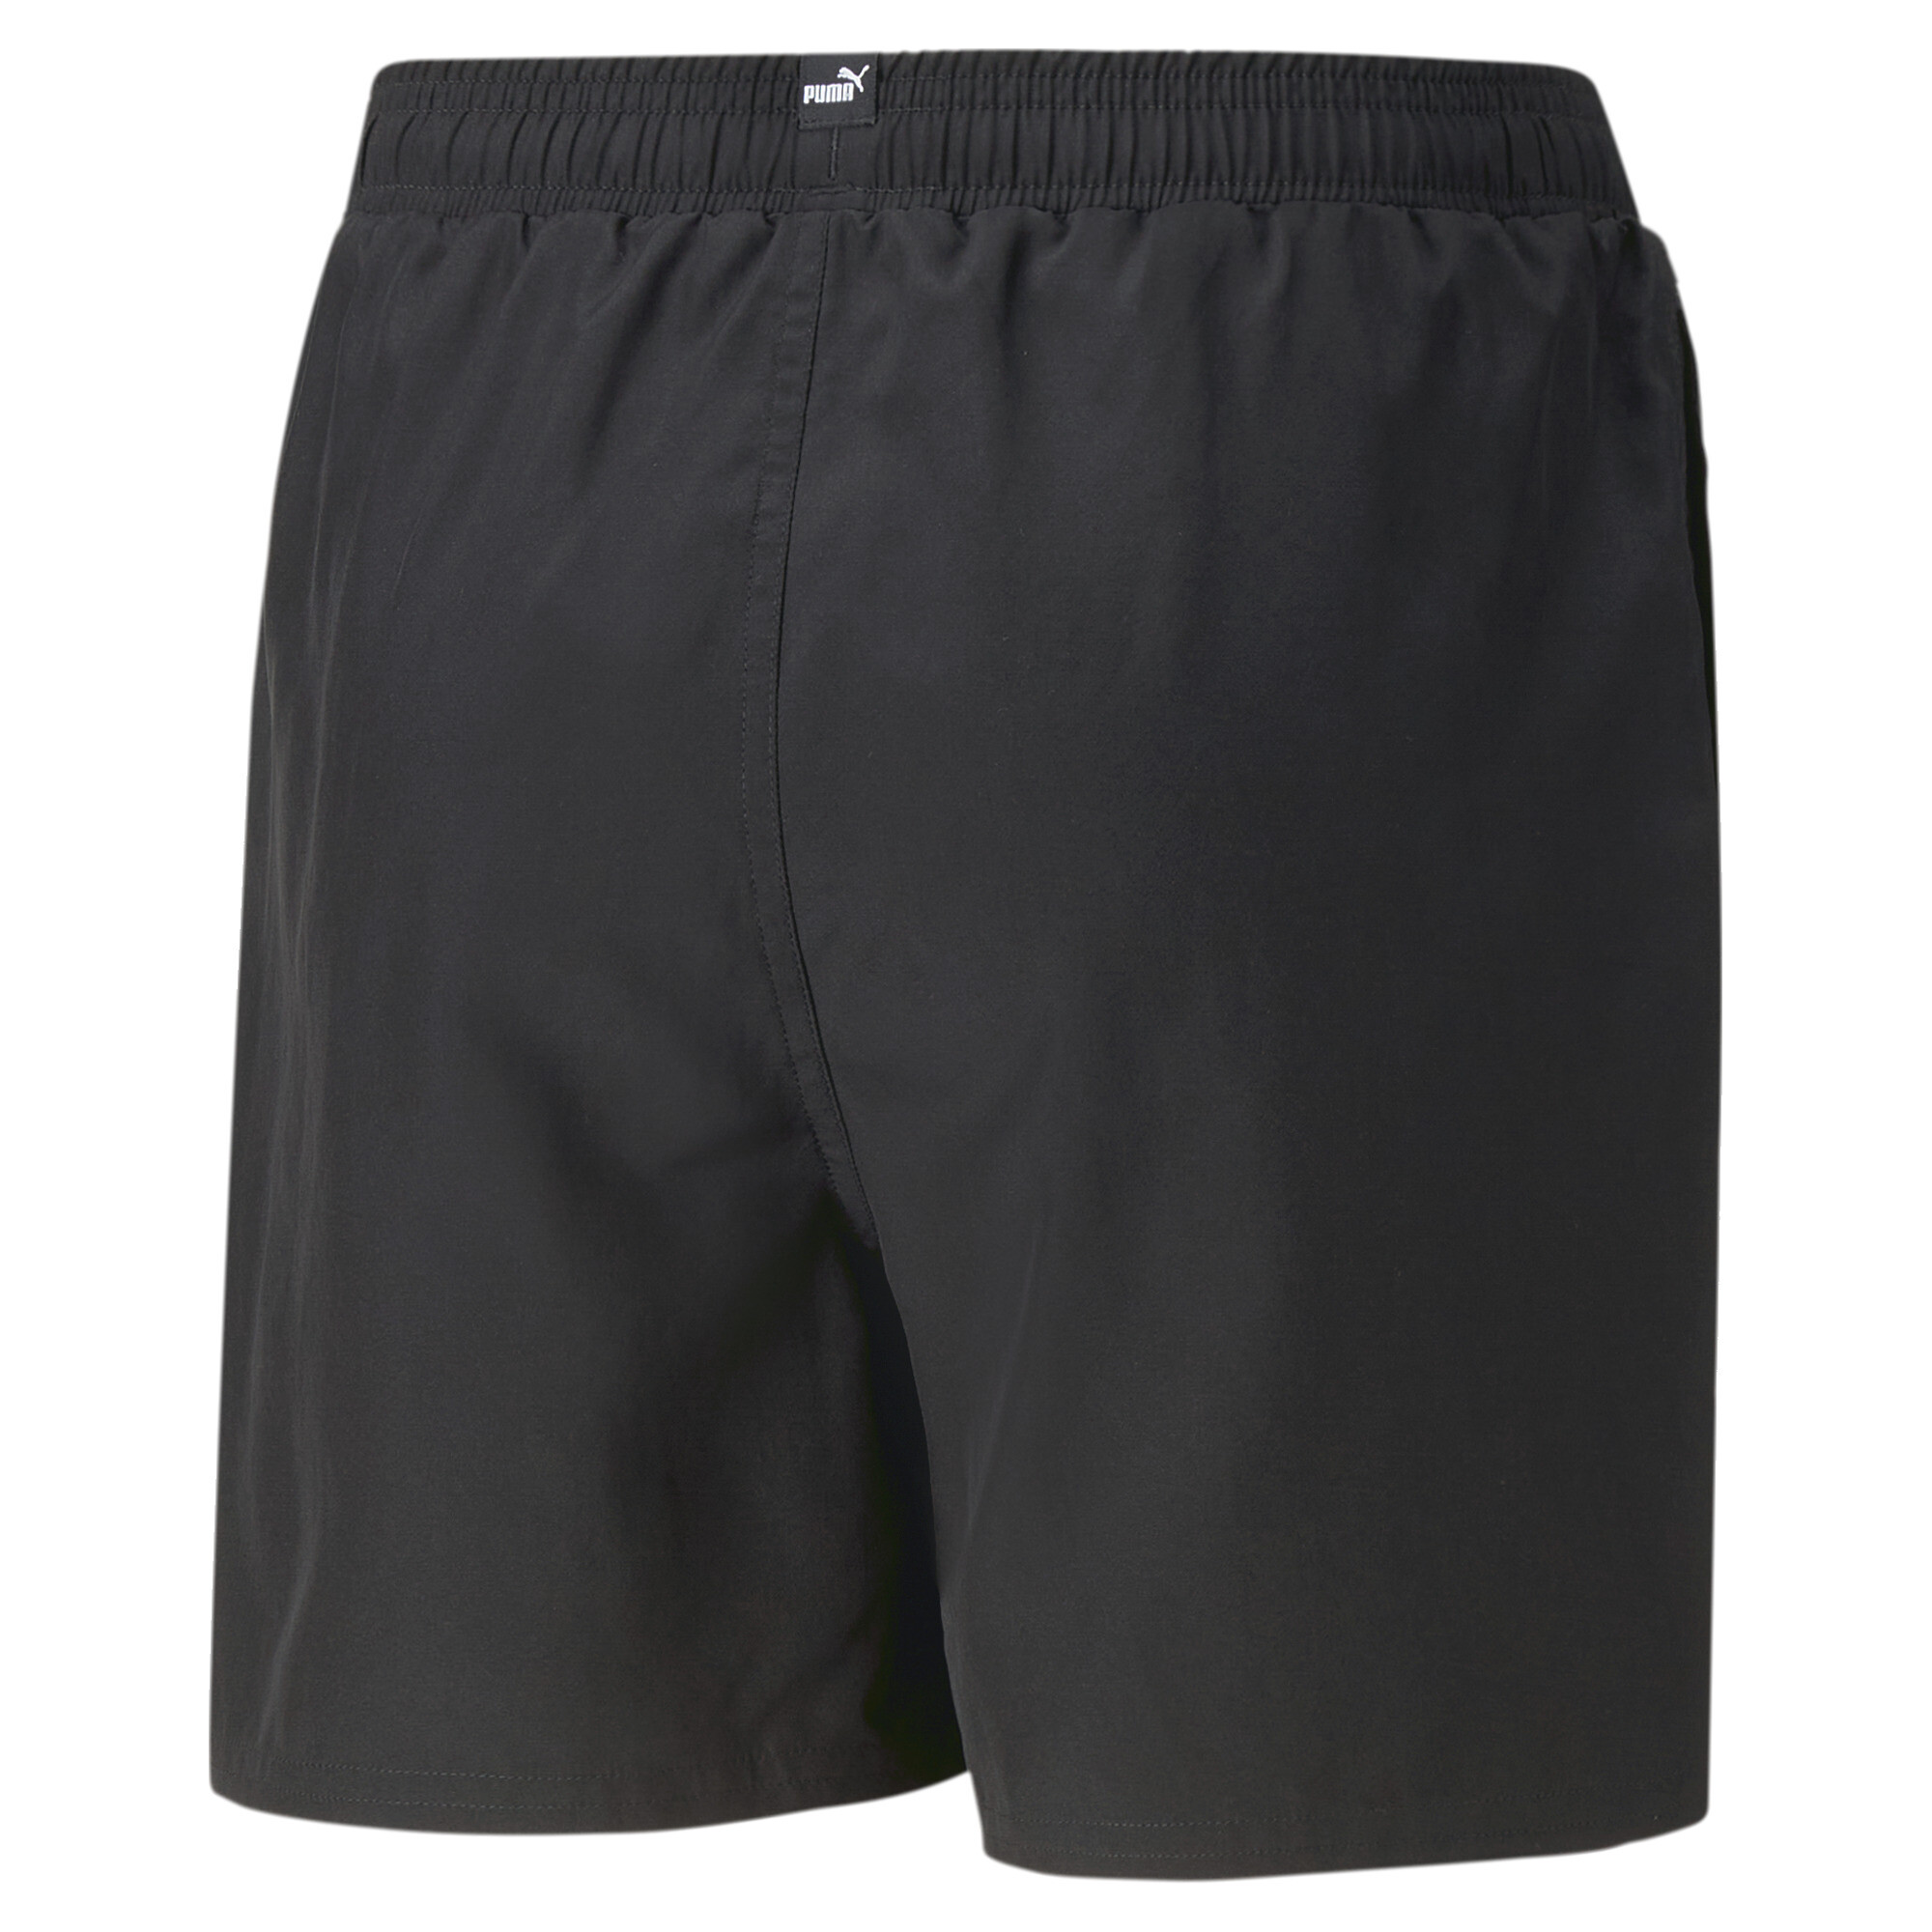 PUMA Essentials+ Logolab Woven Shorts In Black, Size 11-12 Youth